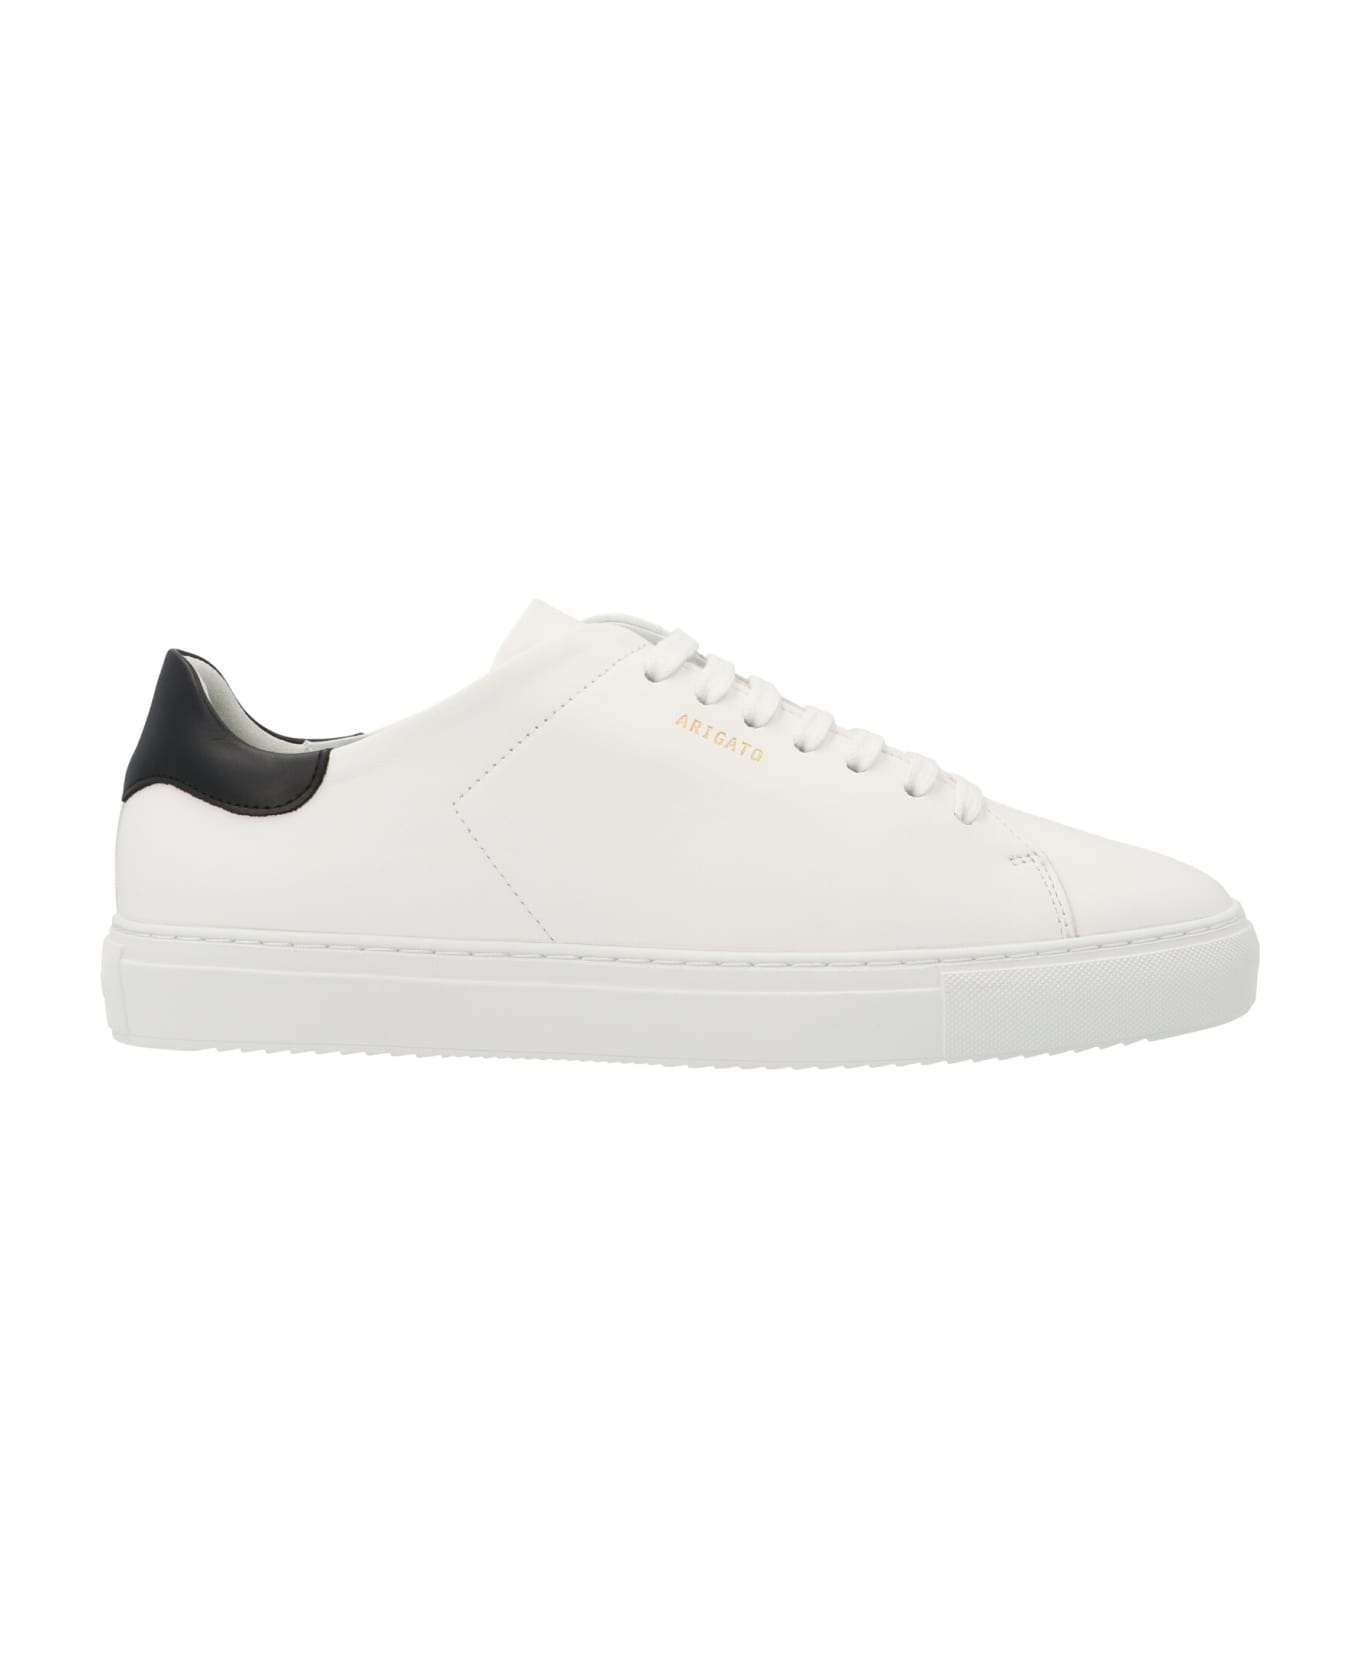 Axel Arigato 'clean 90 Contrast' Shoes - Bianco